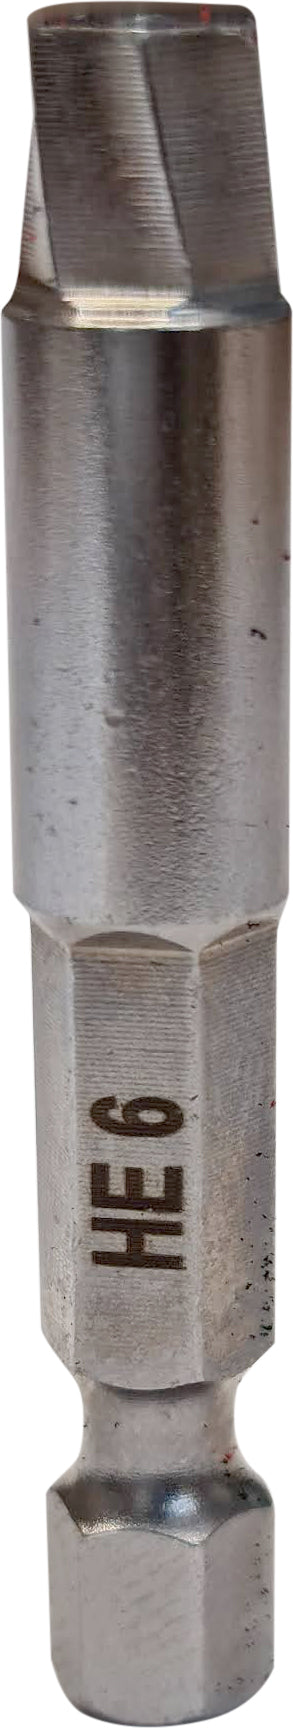 POWERHAND 1/4" Hex Extractor Bit Sockets - Sizes H1.5 to H10